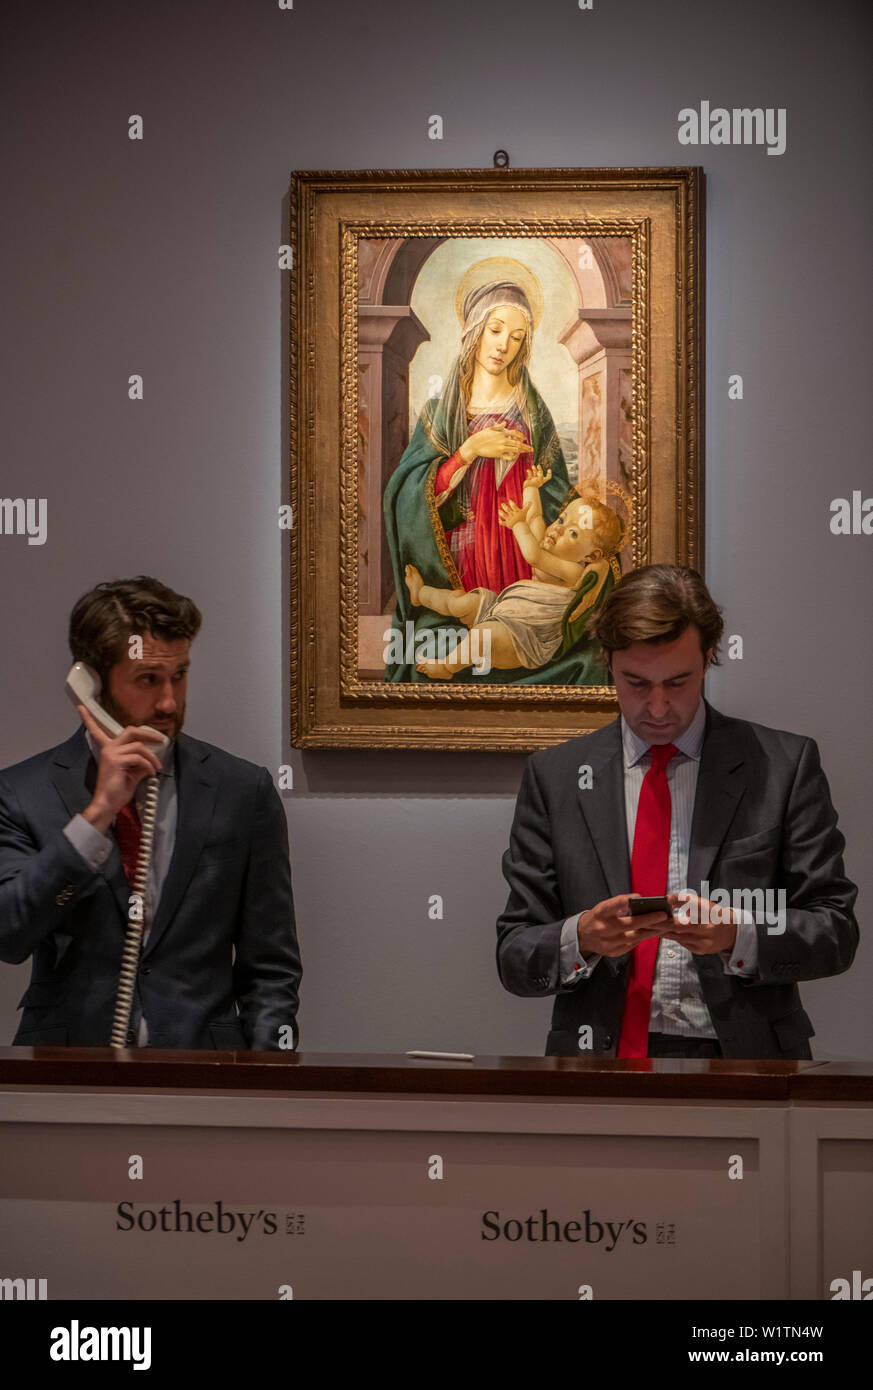 Sotheby’s, London, UK. 3rd July 2019. The summer Old Masters Evening sale offers paintings from the 14th - 19th century by many of the most important painters of Western art. Highlights include a masterpiece by each of Britain’s greatest landscape painters - Turner, Constable and Gainsborough - and extraordinary works from the Baroque by Ribera and the exceptionally rare Johann Liss. Sale total for the evening was £56,205,950 sterling. Credit: Malcolm Park/Alamy Live News. Stock Photo